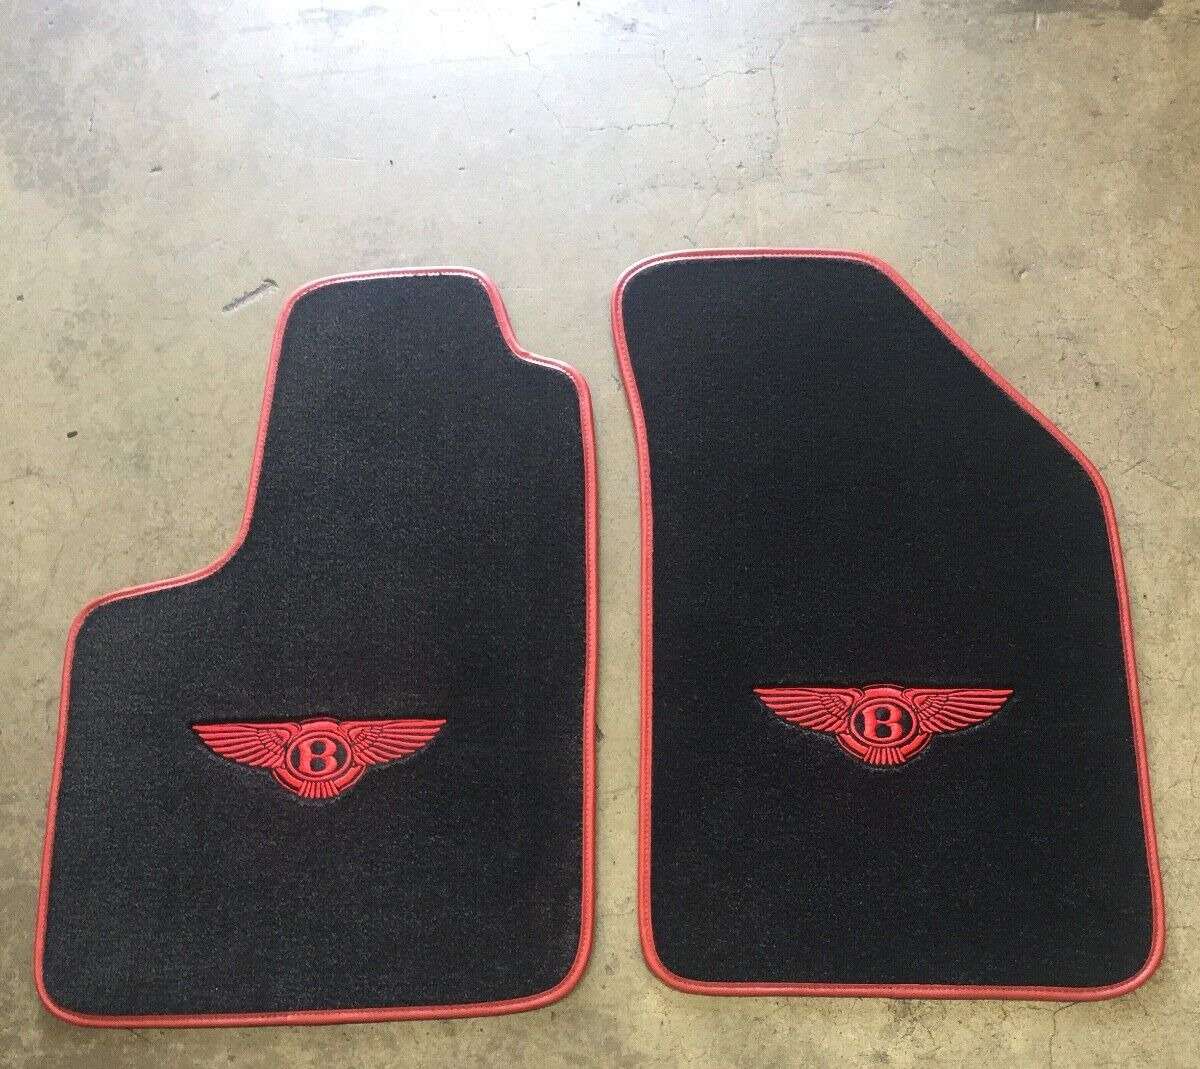 Bentley Cont Gt Coupe Custom Car Floor Mats 04-16 Black W/ Red Wings Red Edging